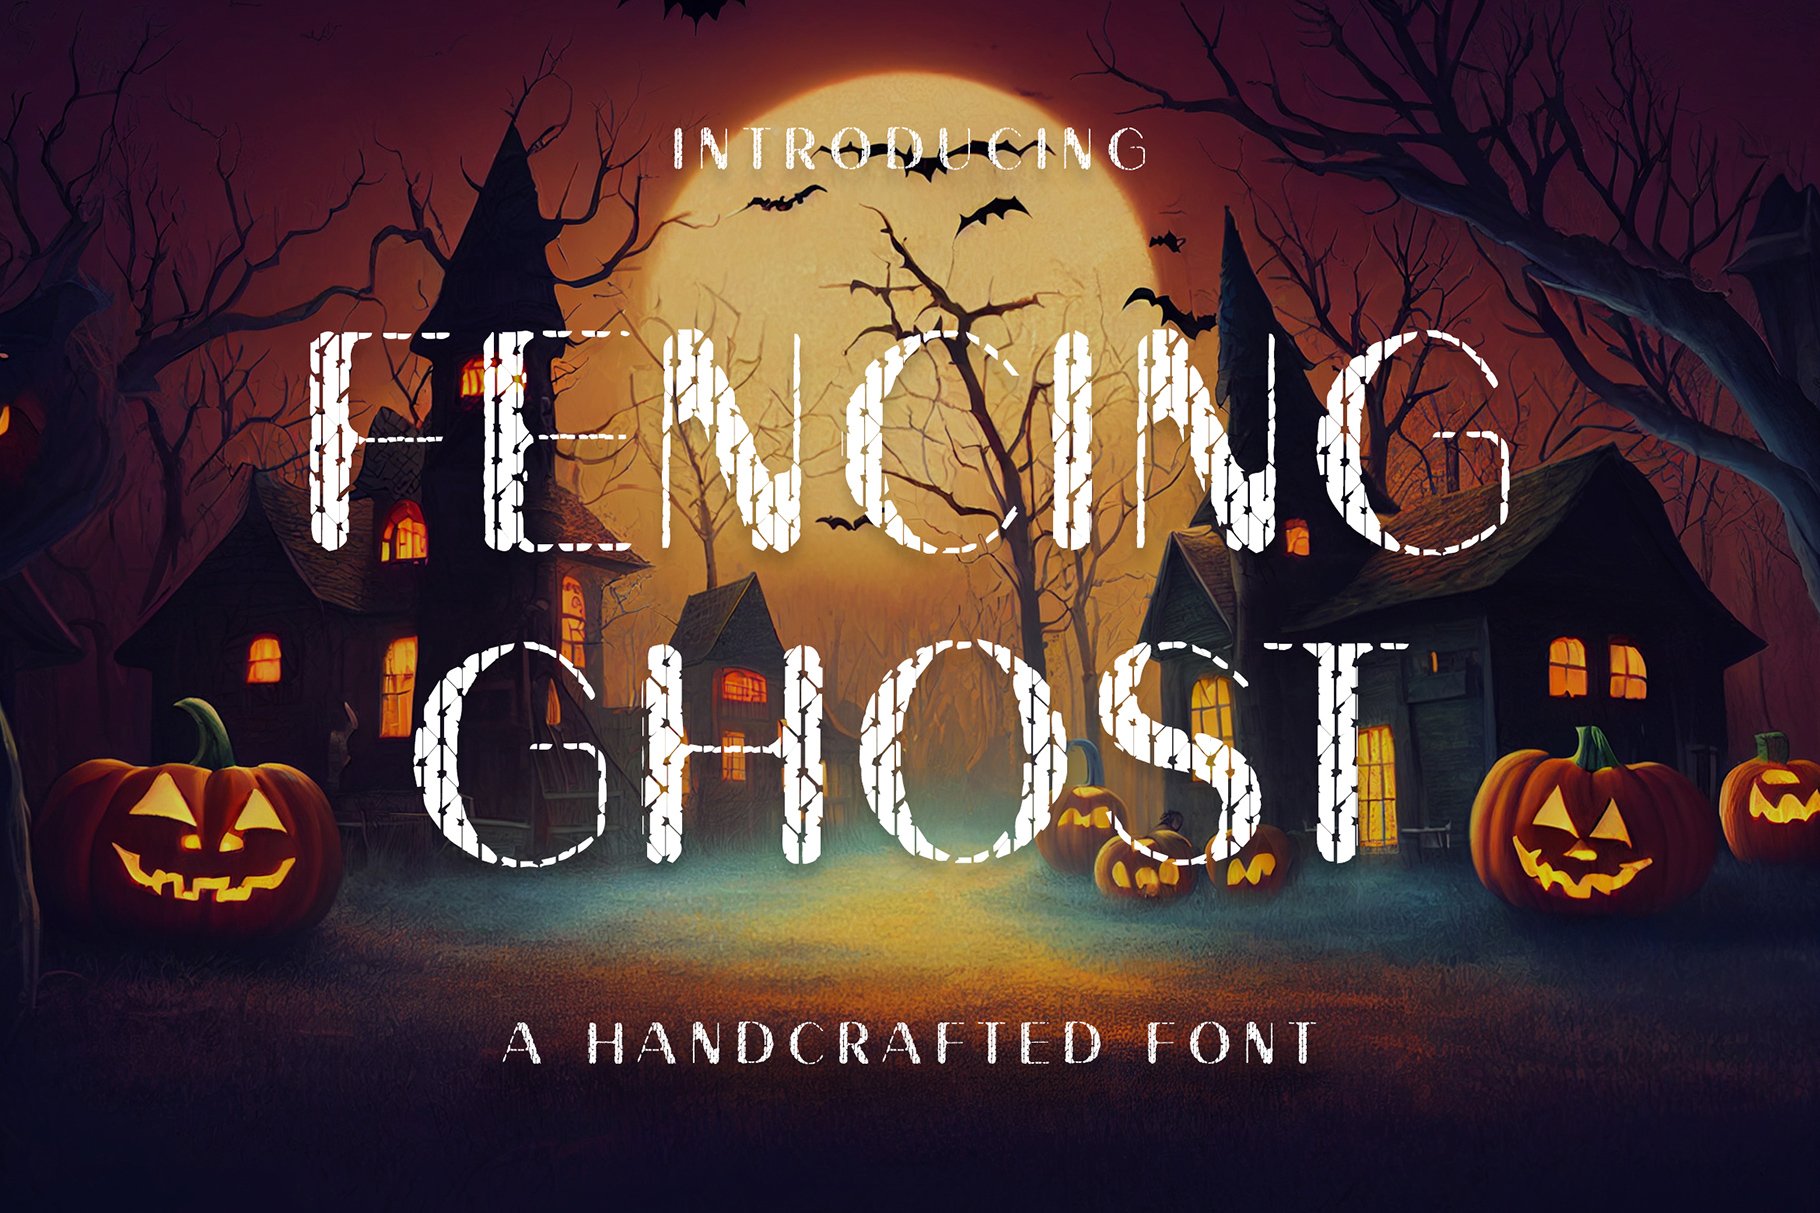 Fencing Ghost Handcrafted Font cover image.